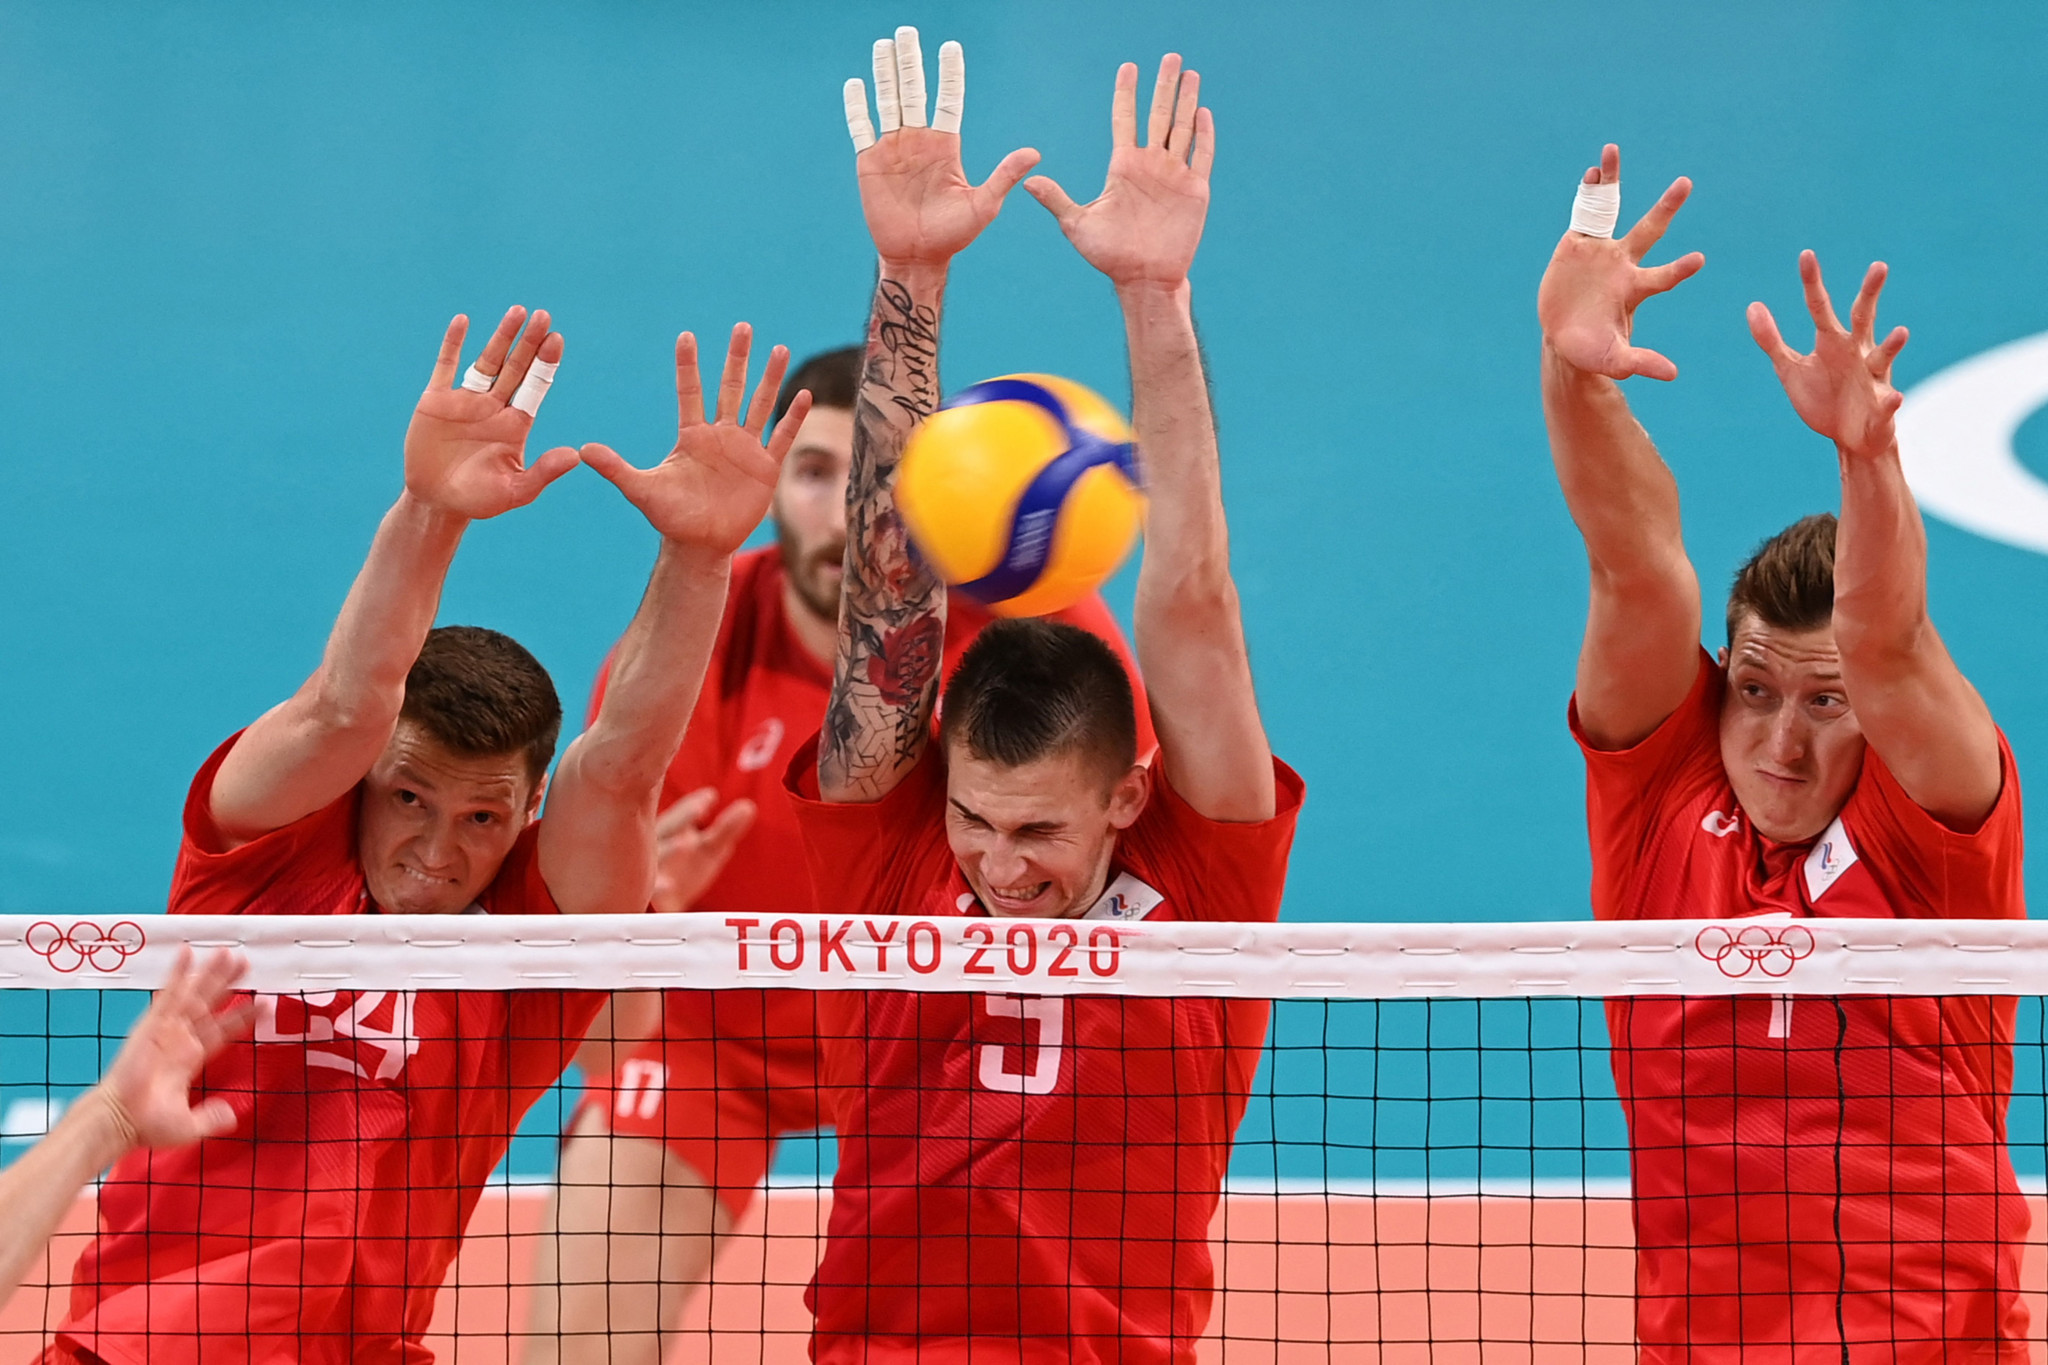 The Volleyball Federation of Russia, along with Belarus, have been banned from FIVB events and are set to to be replaced at the Men's World Championship by Ukraine ©Getty Images